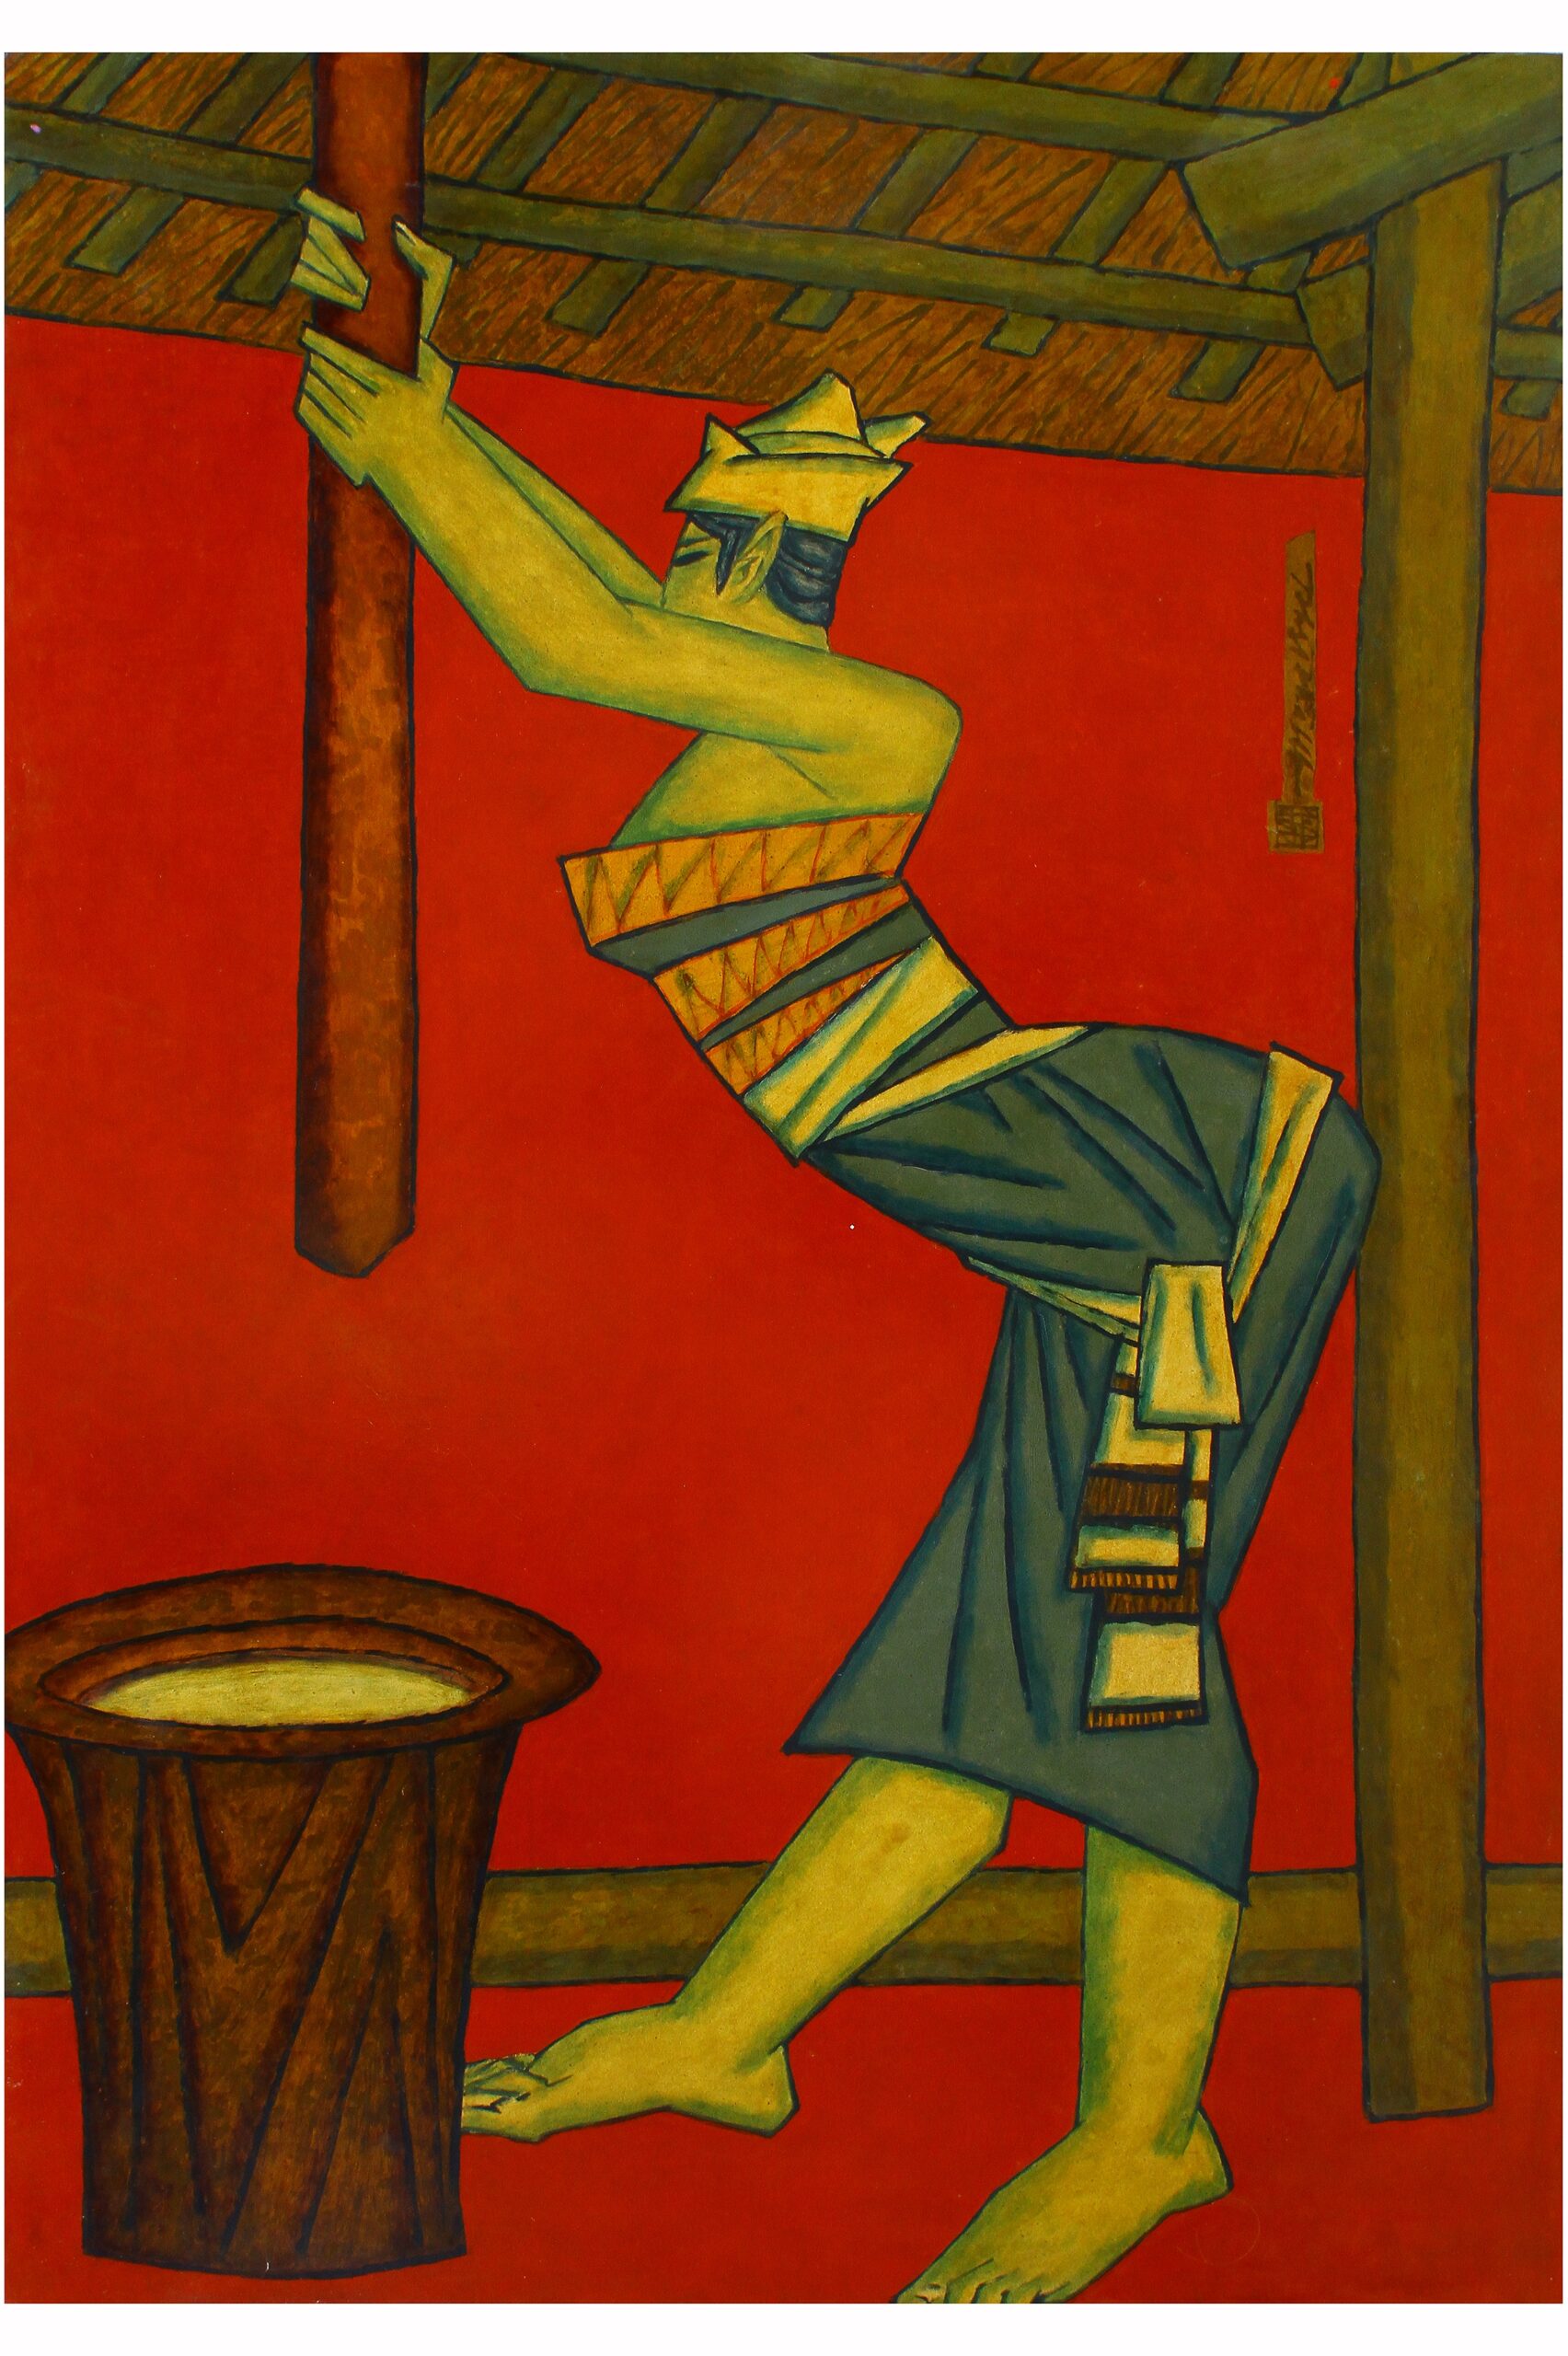 Pounding Rice (detail) by Phung Pham, lacquer on wood, 2003, 120 x 80 cm